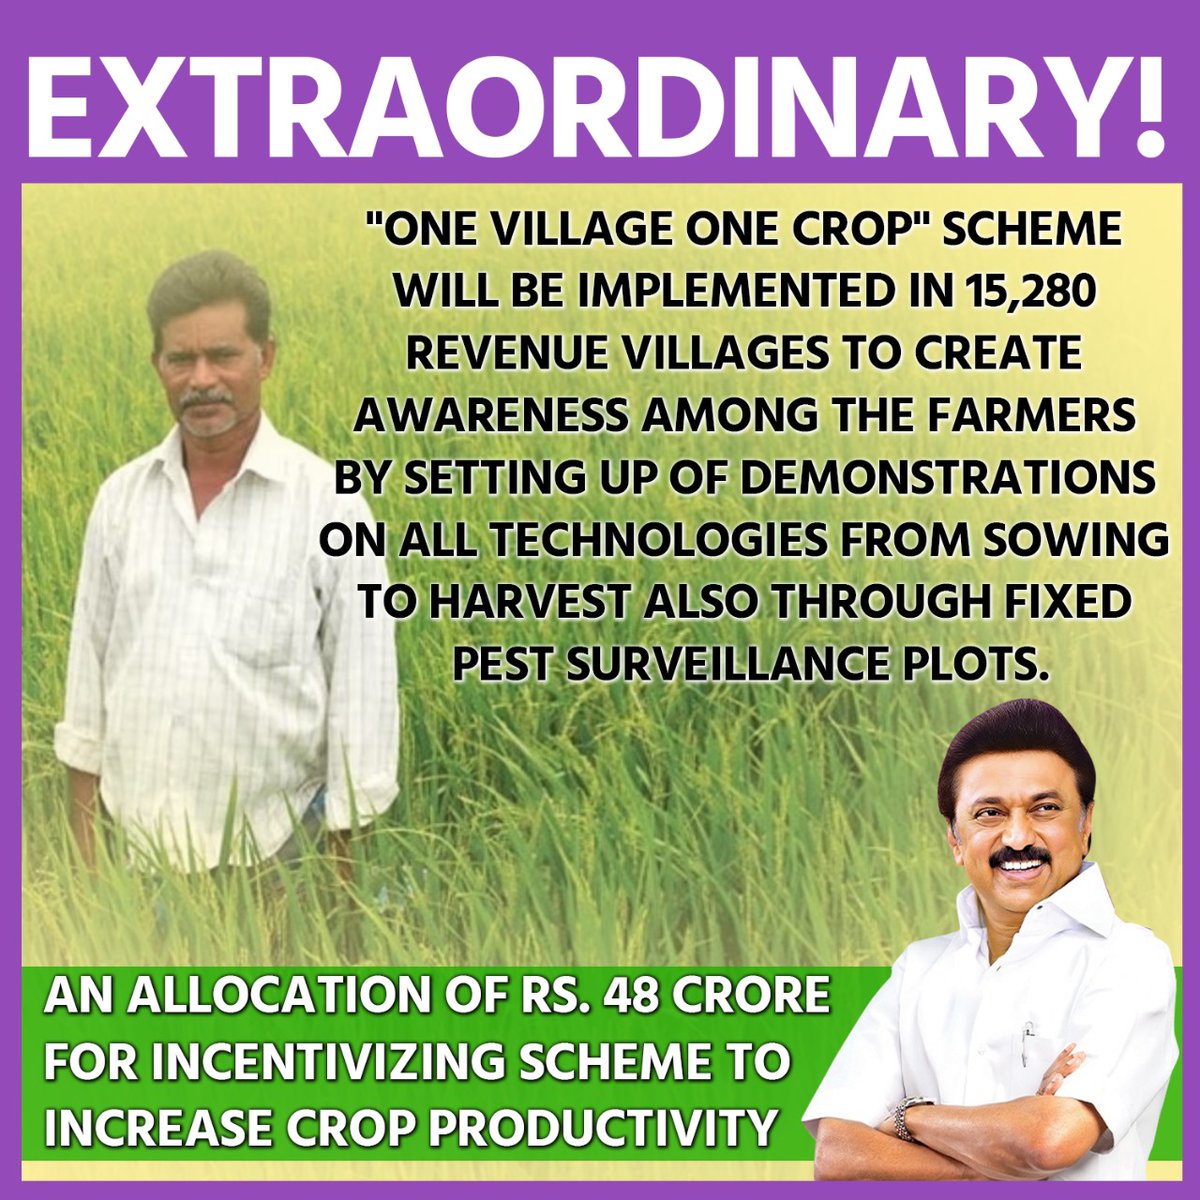 While Tamil Nadu launches 'One Village One Crop' to empower farmers, Modi & BJP fail to match such extraordinary initiatives. With Rs. 48 Crore allocated to incentivize productivity, it's clear where priorities lie! #TNInclusiveBudget #TNBudget2024